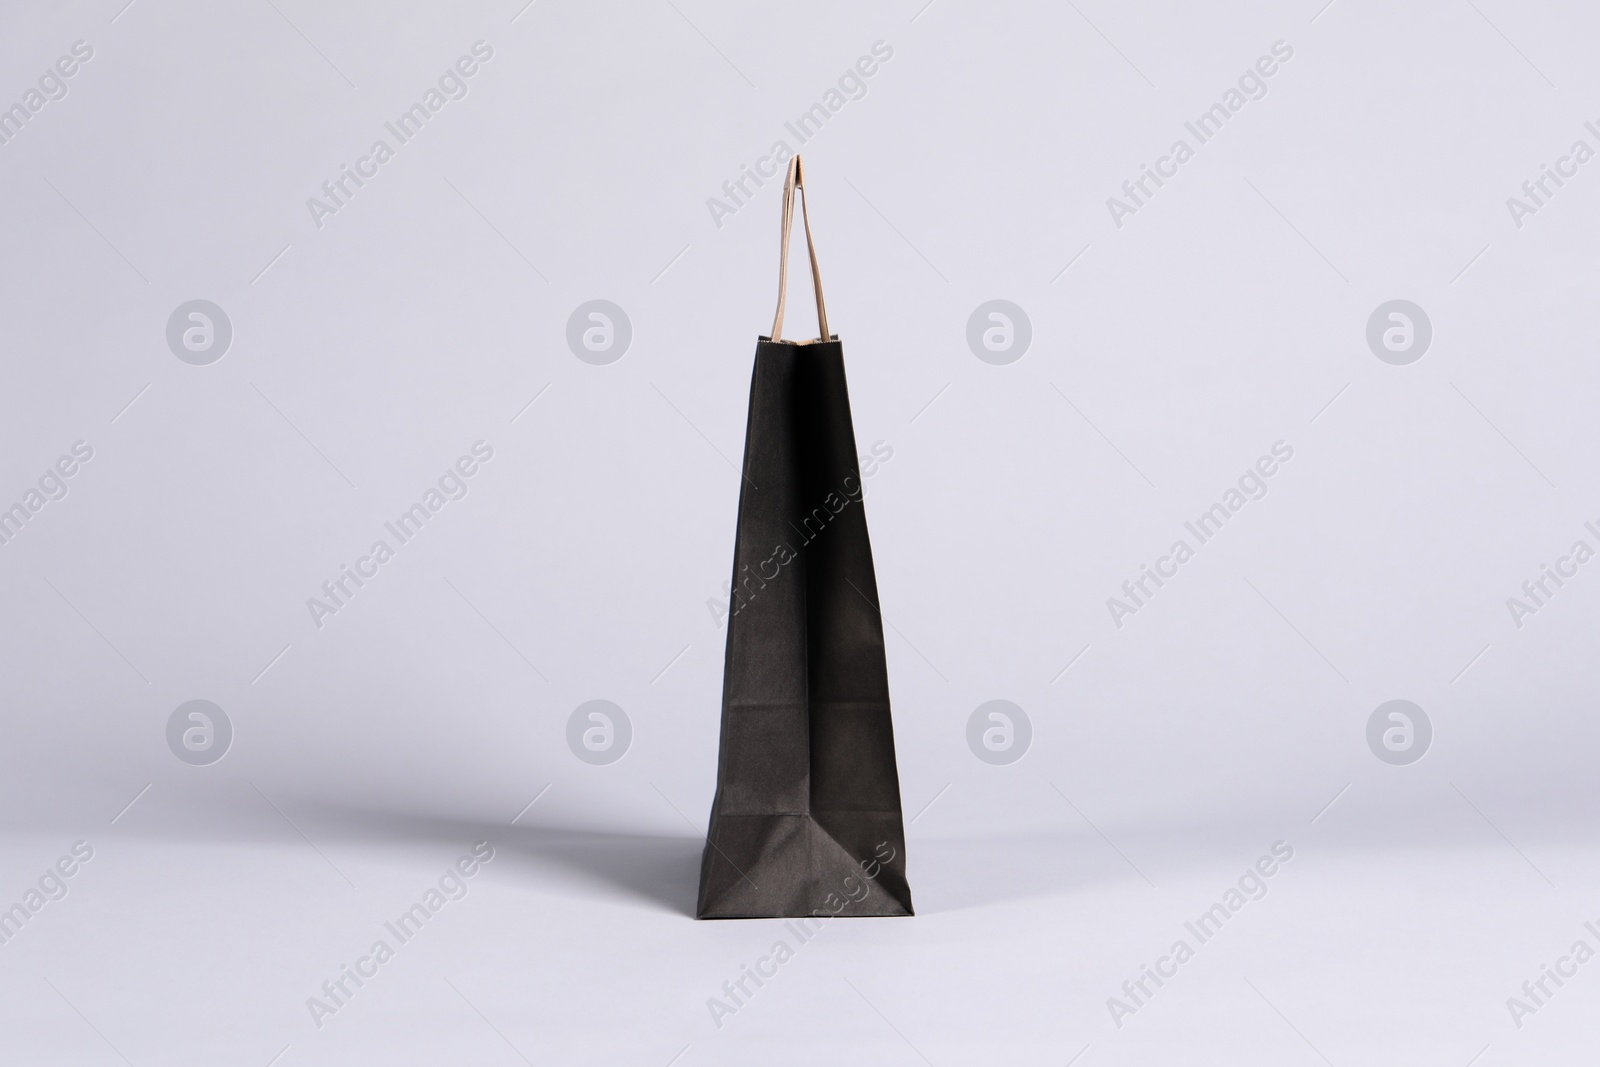 Photo of One black paper shopping bag on grey background